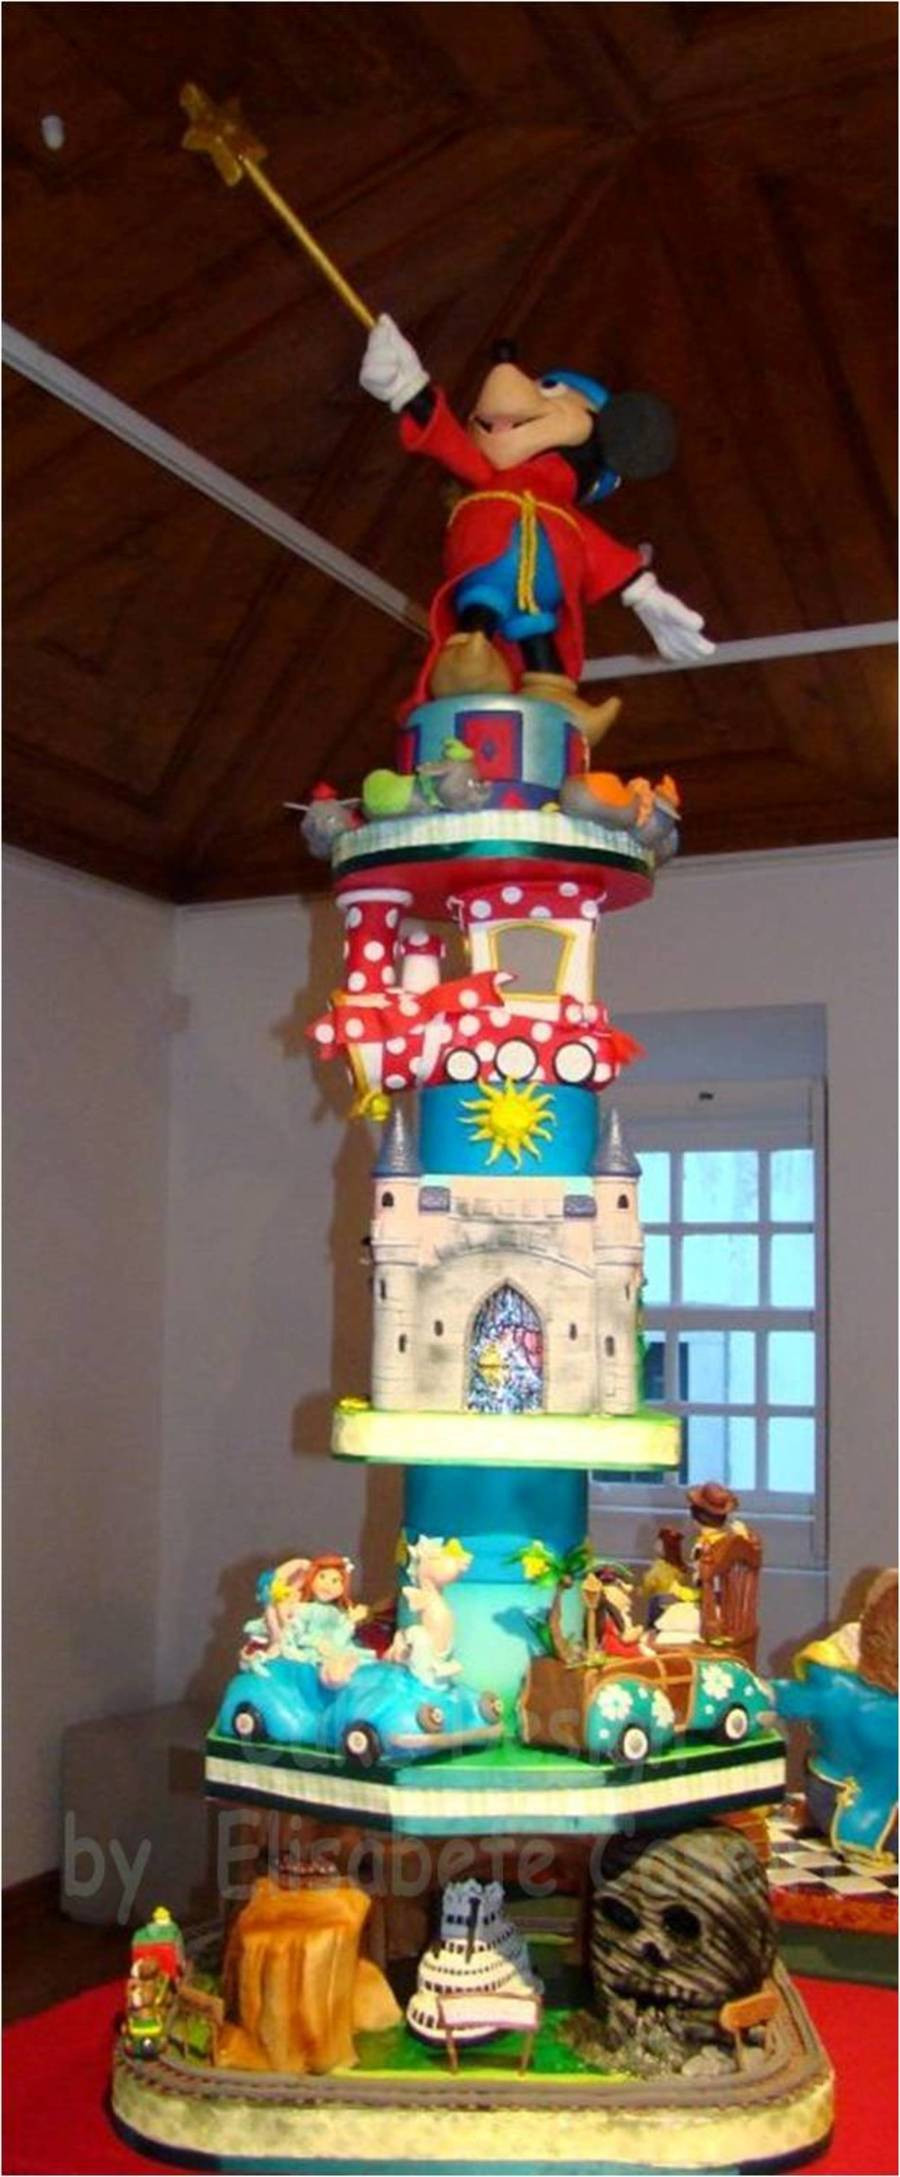 Disneyland Birthday Cake
 I Made This Cake For A petition Devoted To The 20Th